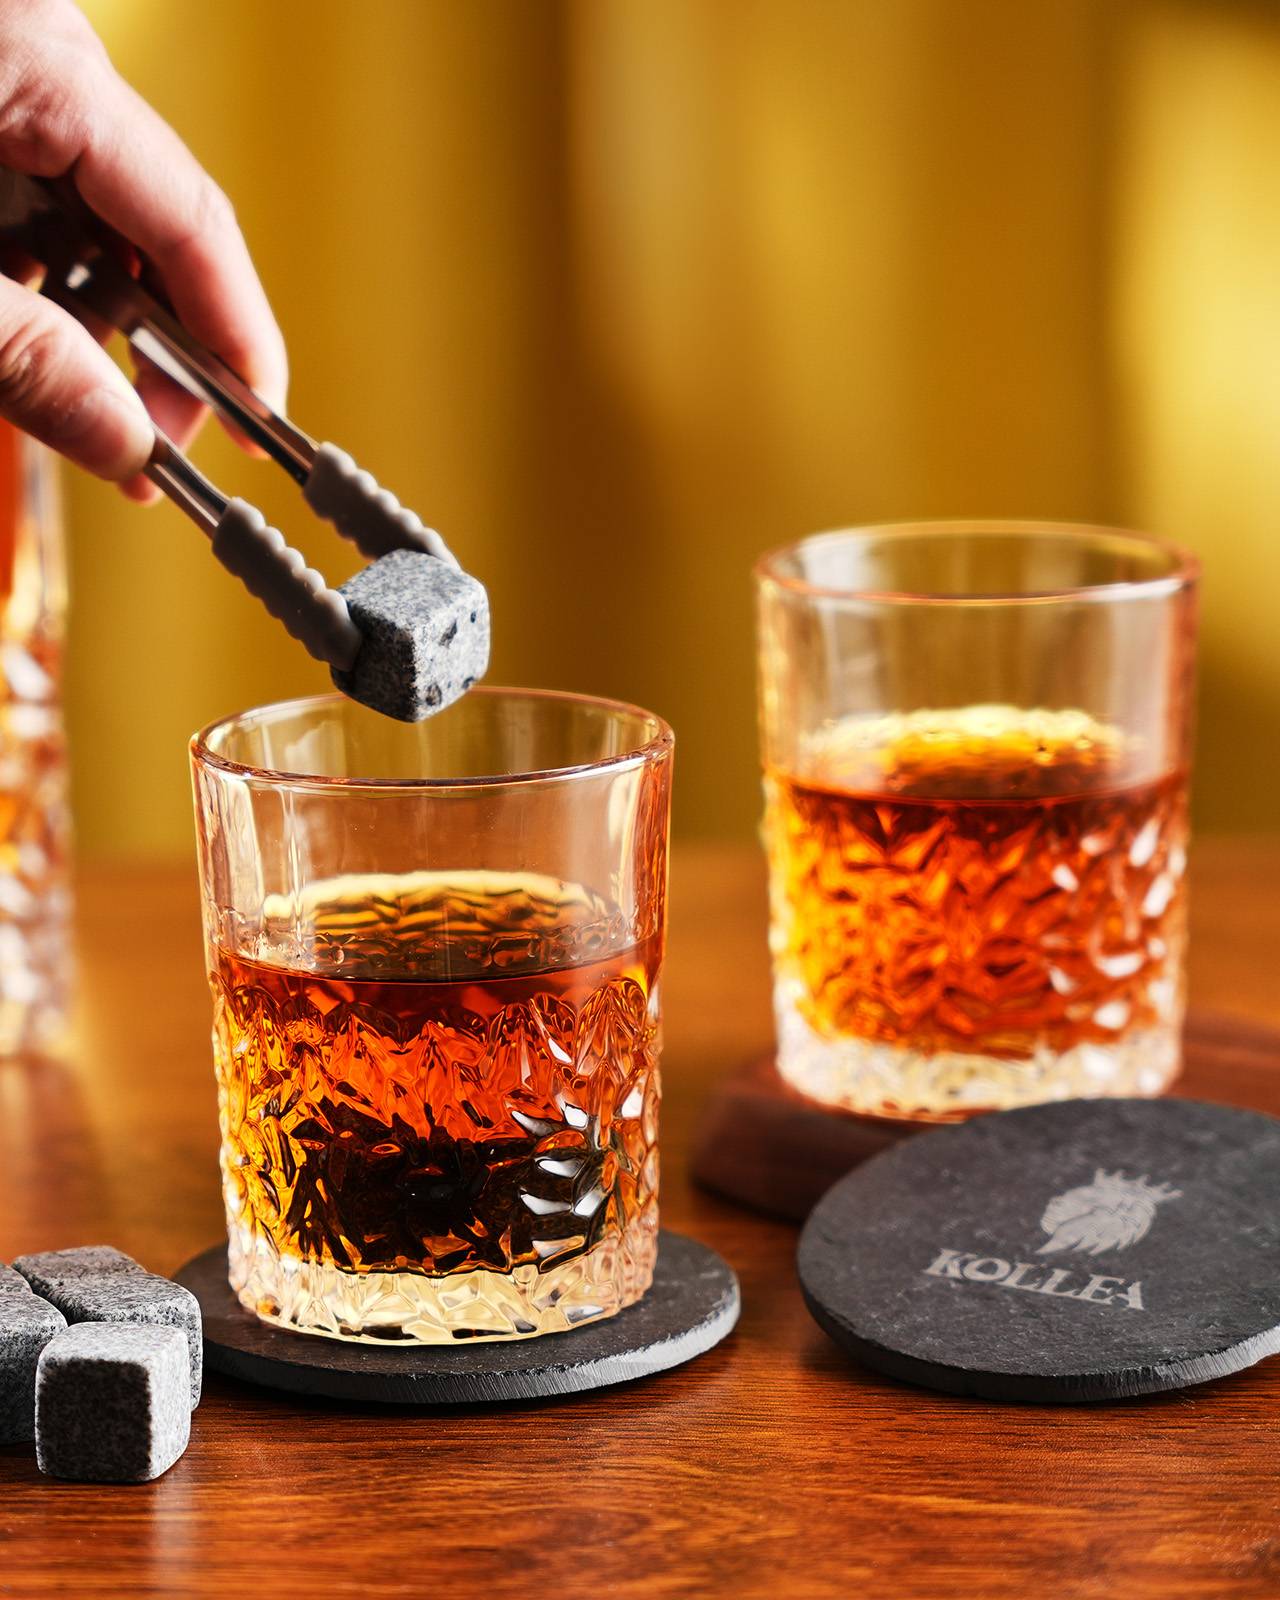 Buy 𝗕𝗘𝗦𝗧 𝗚𝗜𝗙𝗧: Gifts For Men Dad - Whiskey Glass Set of 2 - Bourbon  Whiskey Stones Wood Box Gift Set - Includes Crystal Whisky Glasses,  Chilling Rocks, Slate Coasters for Scotch